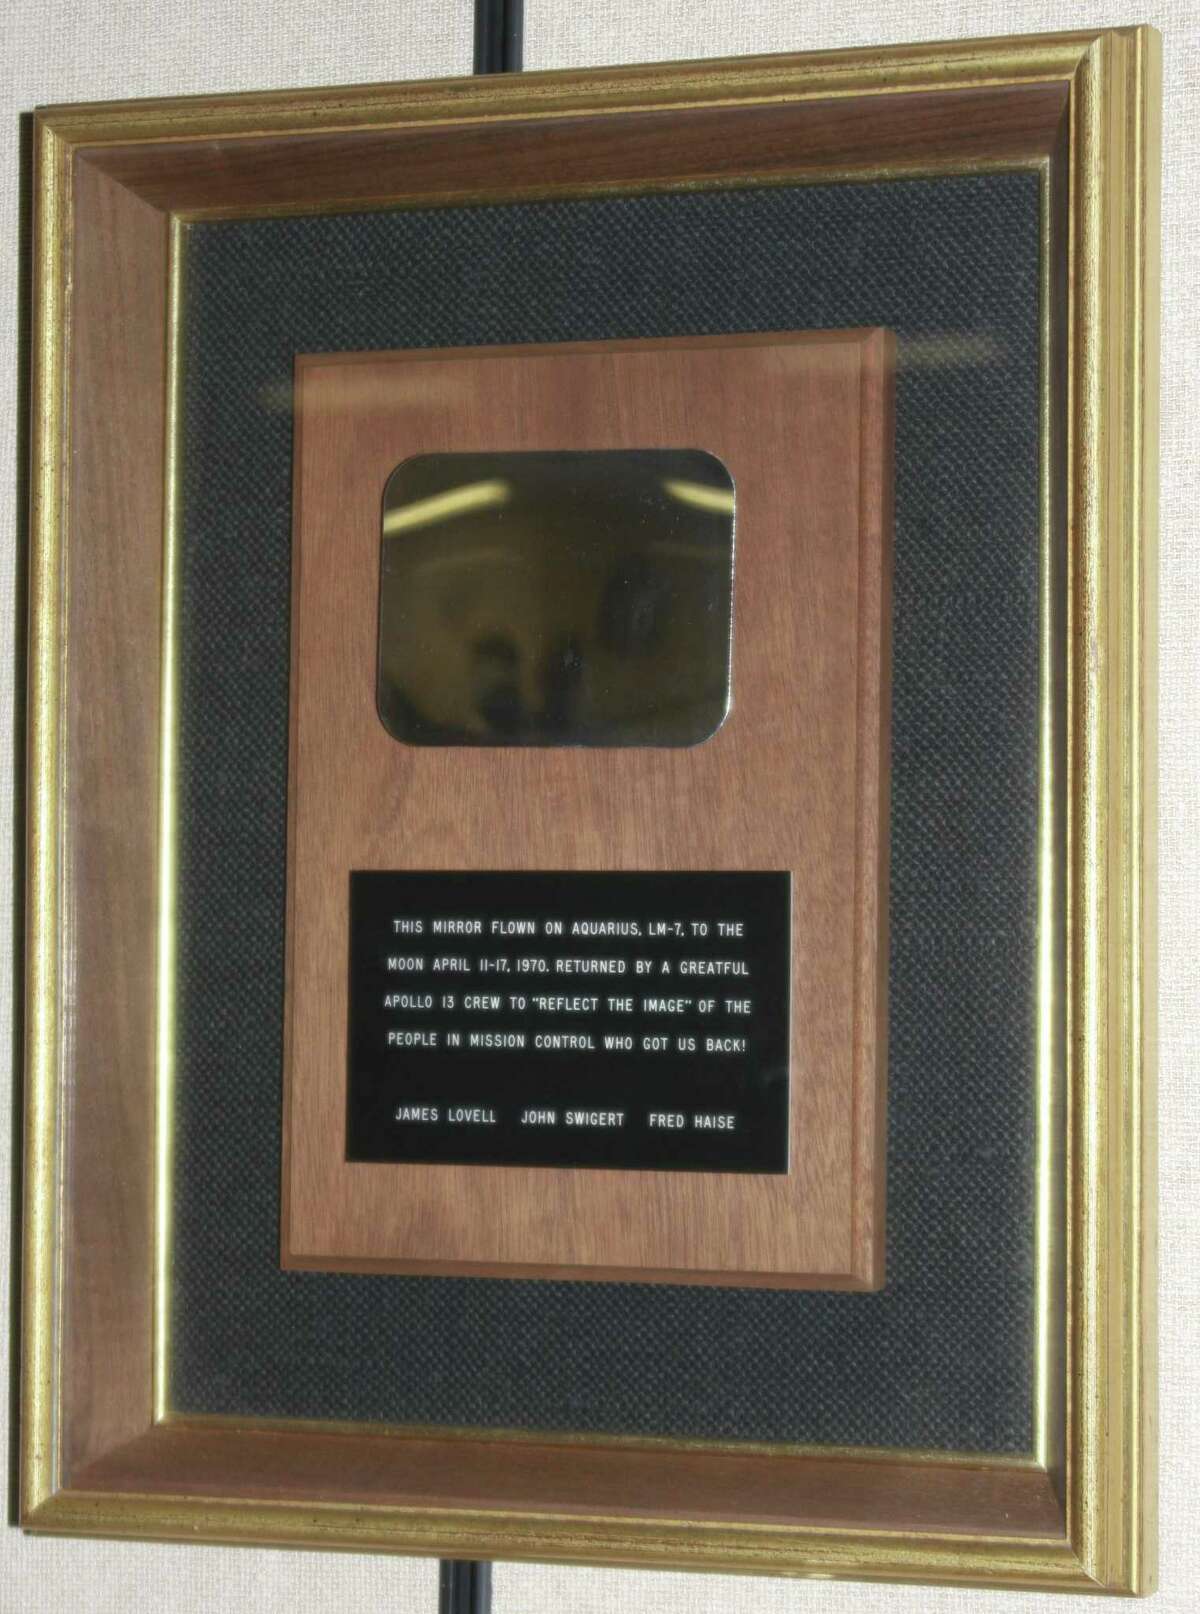 The mirror the Apollo 13 crew presented presented to mission control for helping them survive. The plaque reads “This mirror flown on Aquarius, LM-7, to the moon April 11-17, 1970. Returned by a greatful Apollo 13 crew to ‘reflect the image’ of the people in Mission Control who got us back! James Lovell John Swigert Fred Haise.”